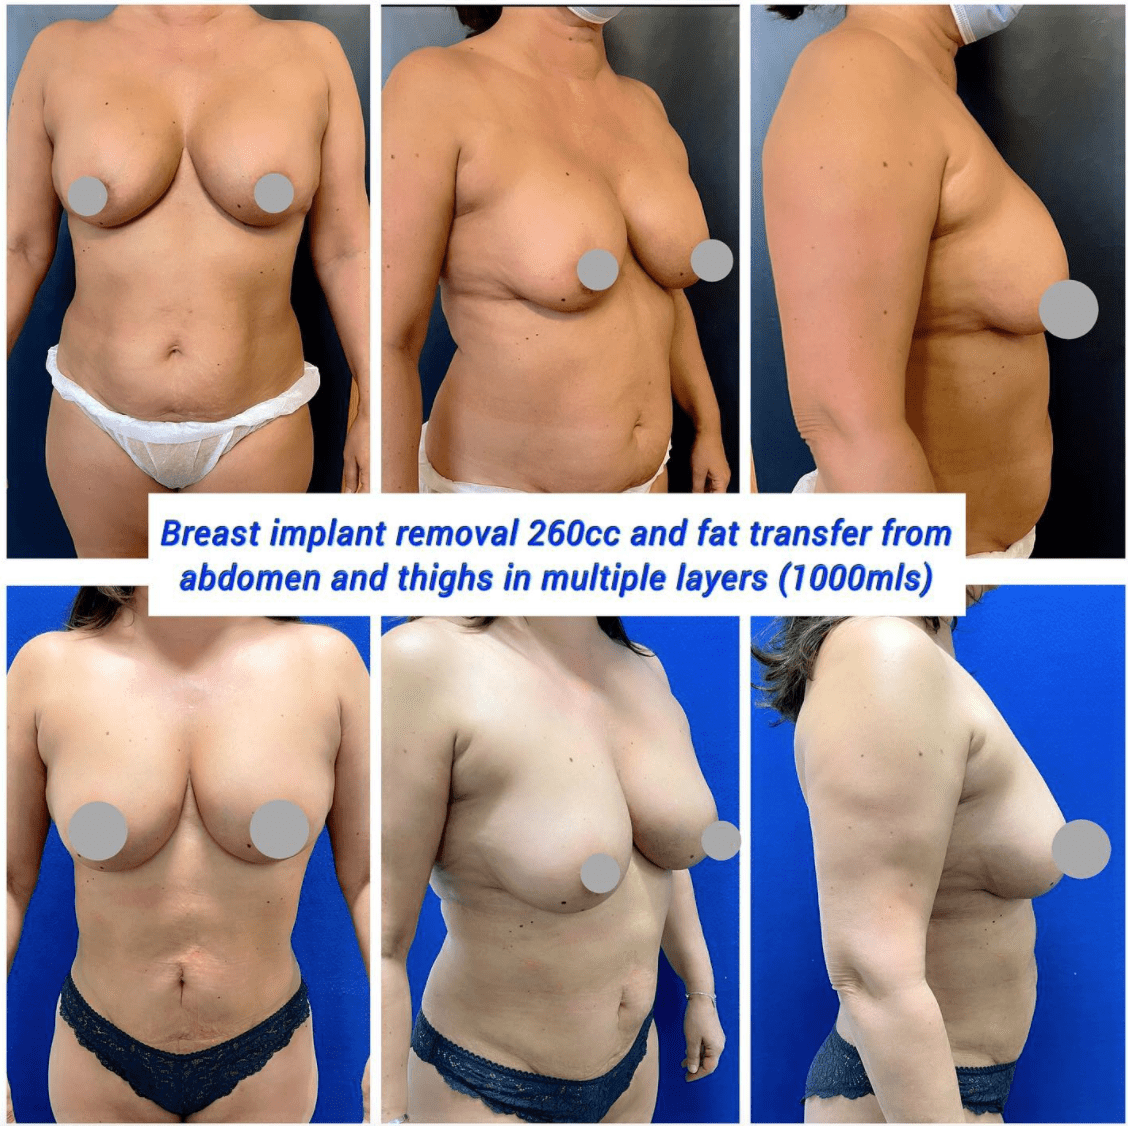 Breast implant removal and fat transfer from abdomen and thighs